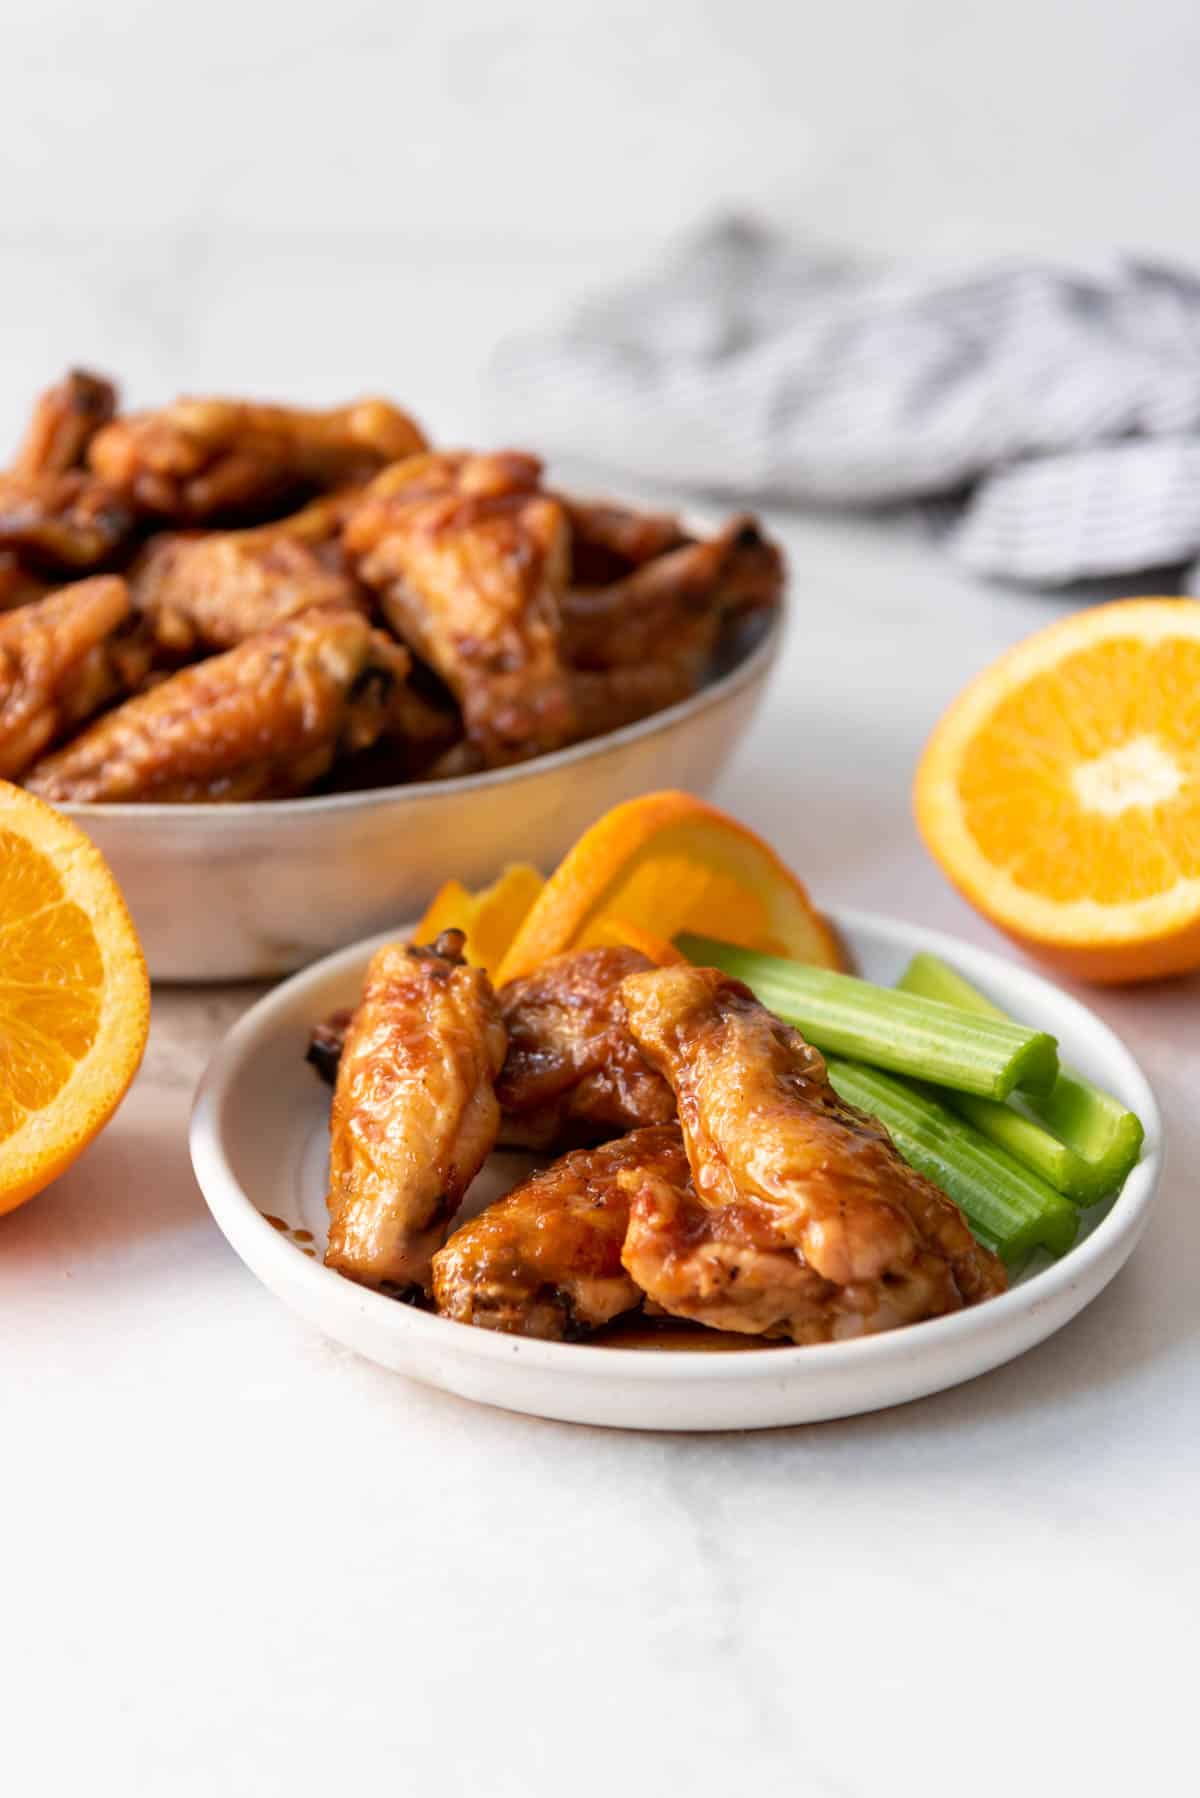 orange party wings Little Cutie baby shower food ideas. Check out this list of Little Cutie baby shower ideas. Includes ideas for favors, food, decorations and more.